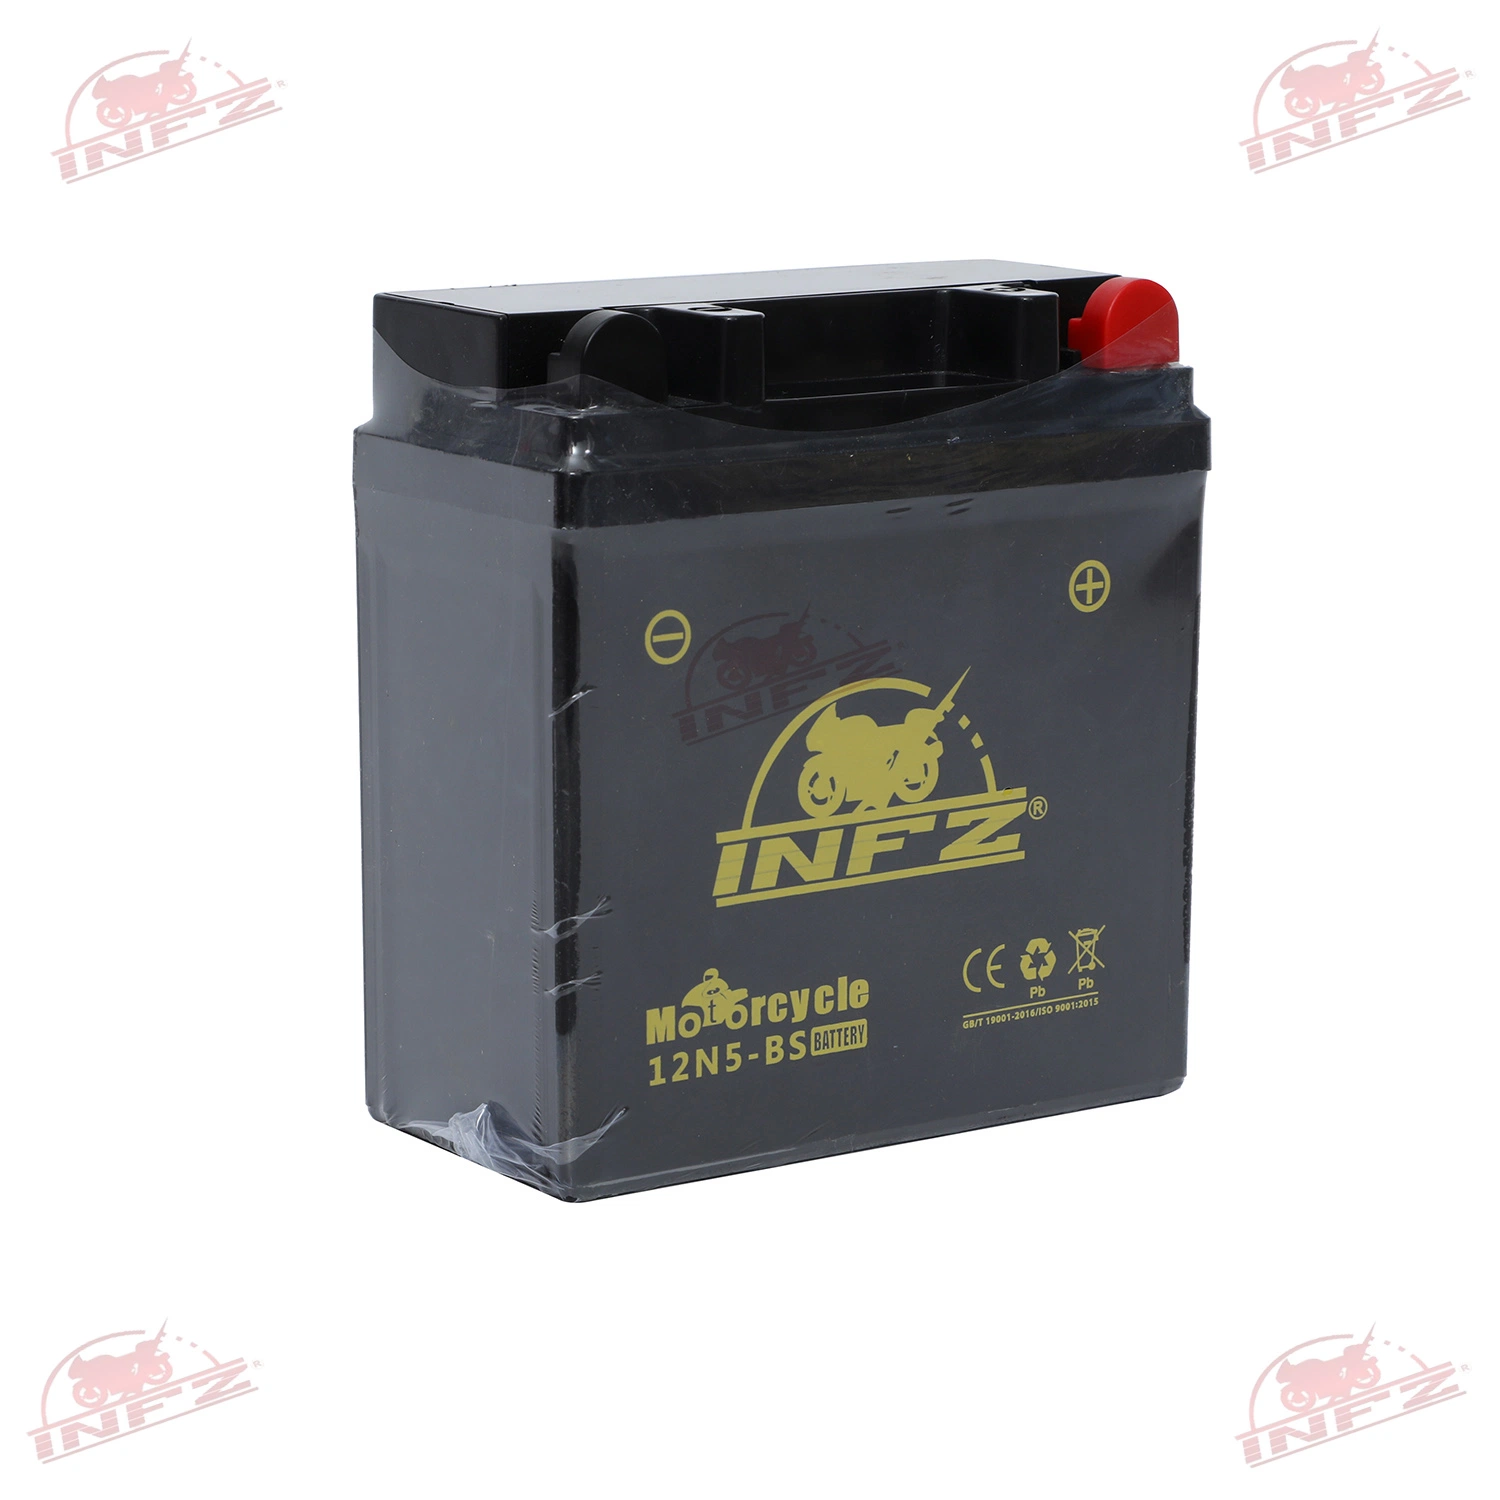 Infz Motorcycle Accessories Suppliers Ytx7l-BS Mini Motorcycle Battery China Motorcycle Battery in Storage Battery for 12n5-BS